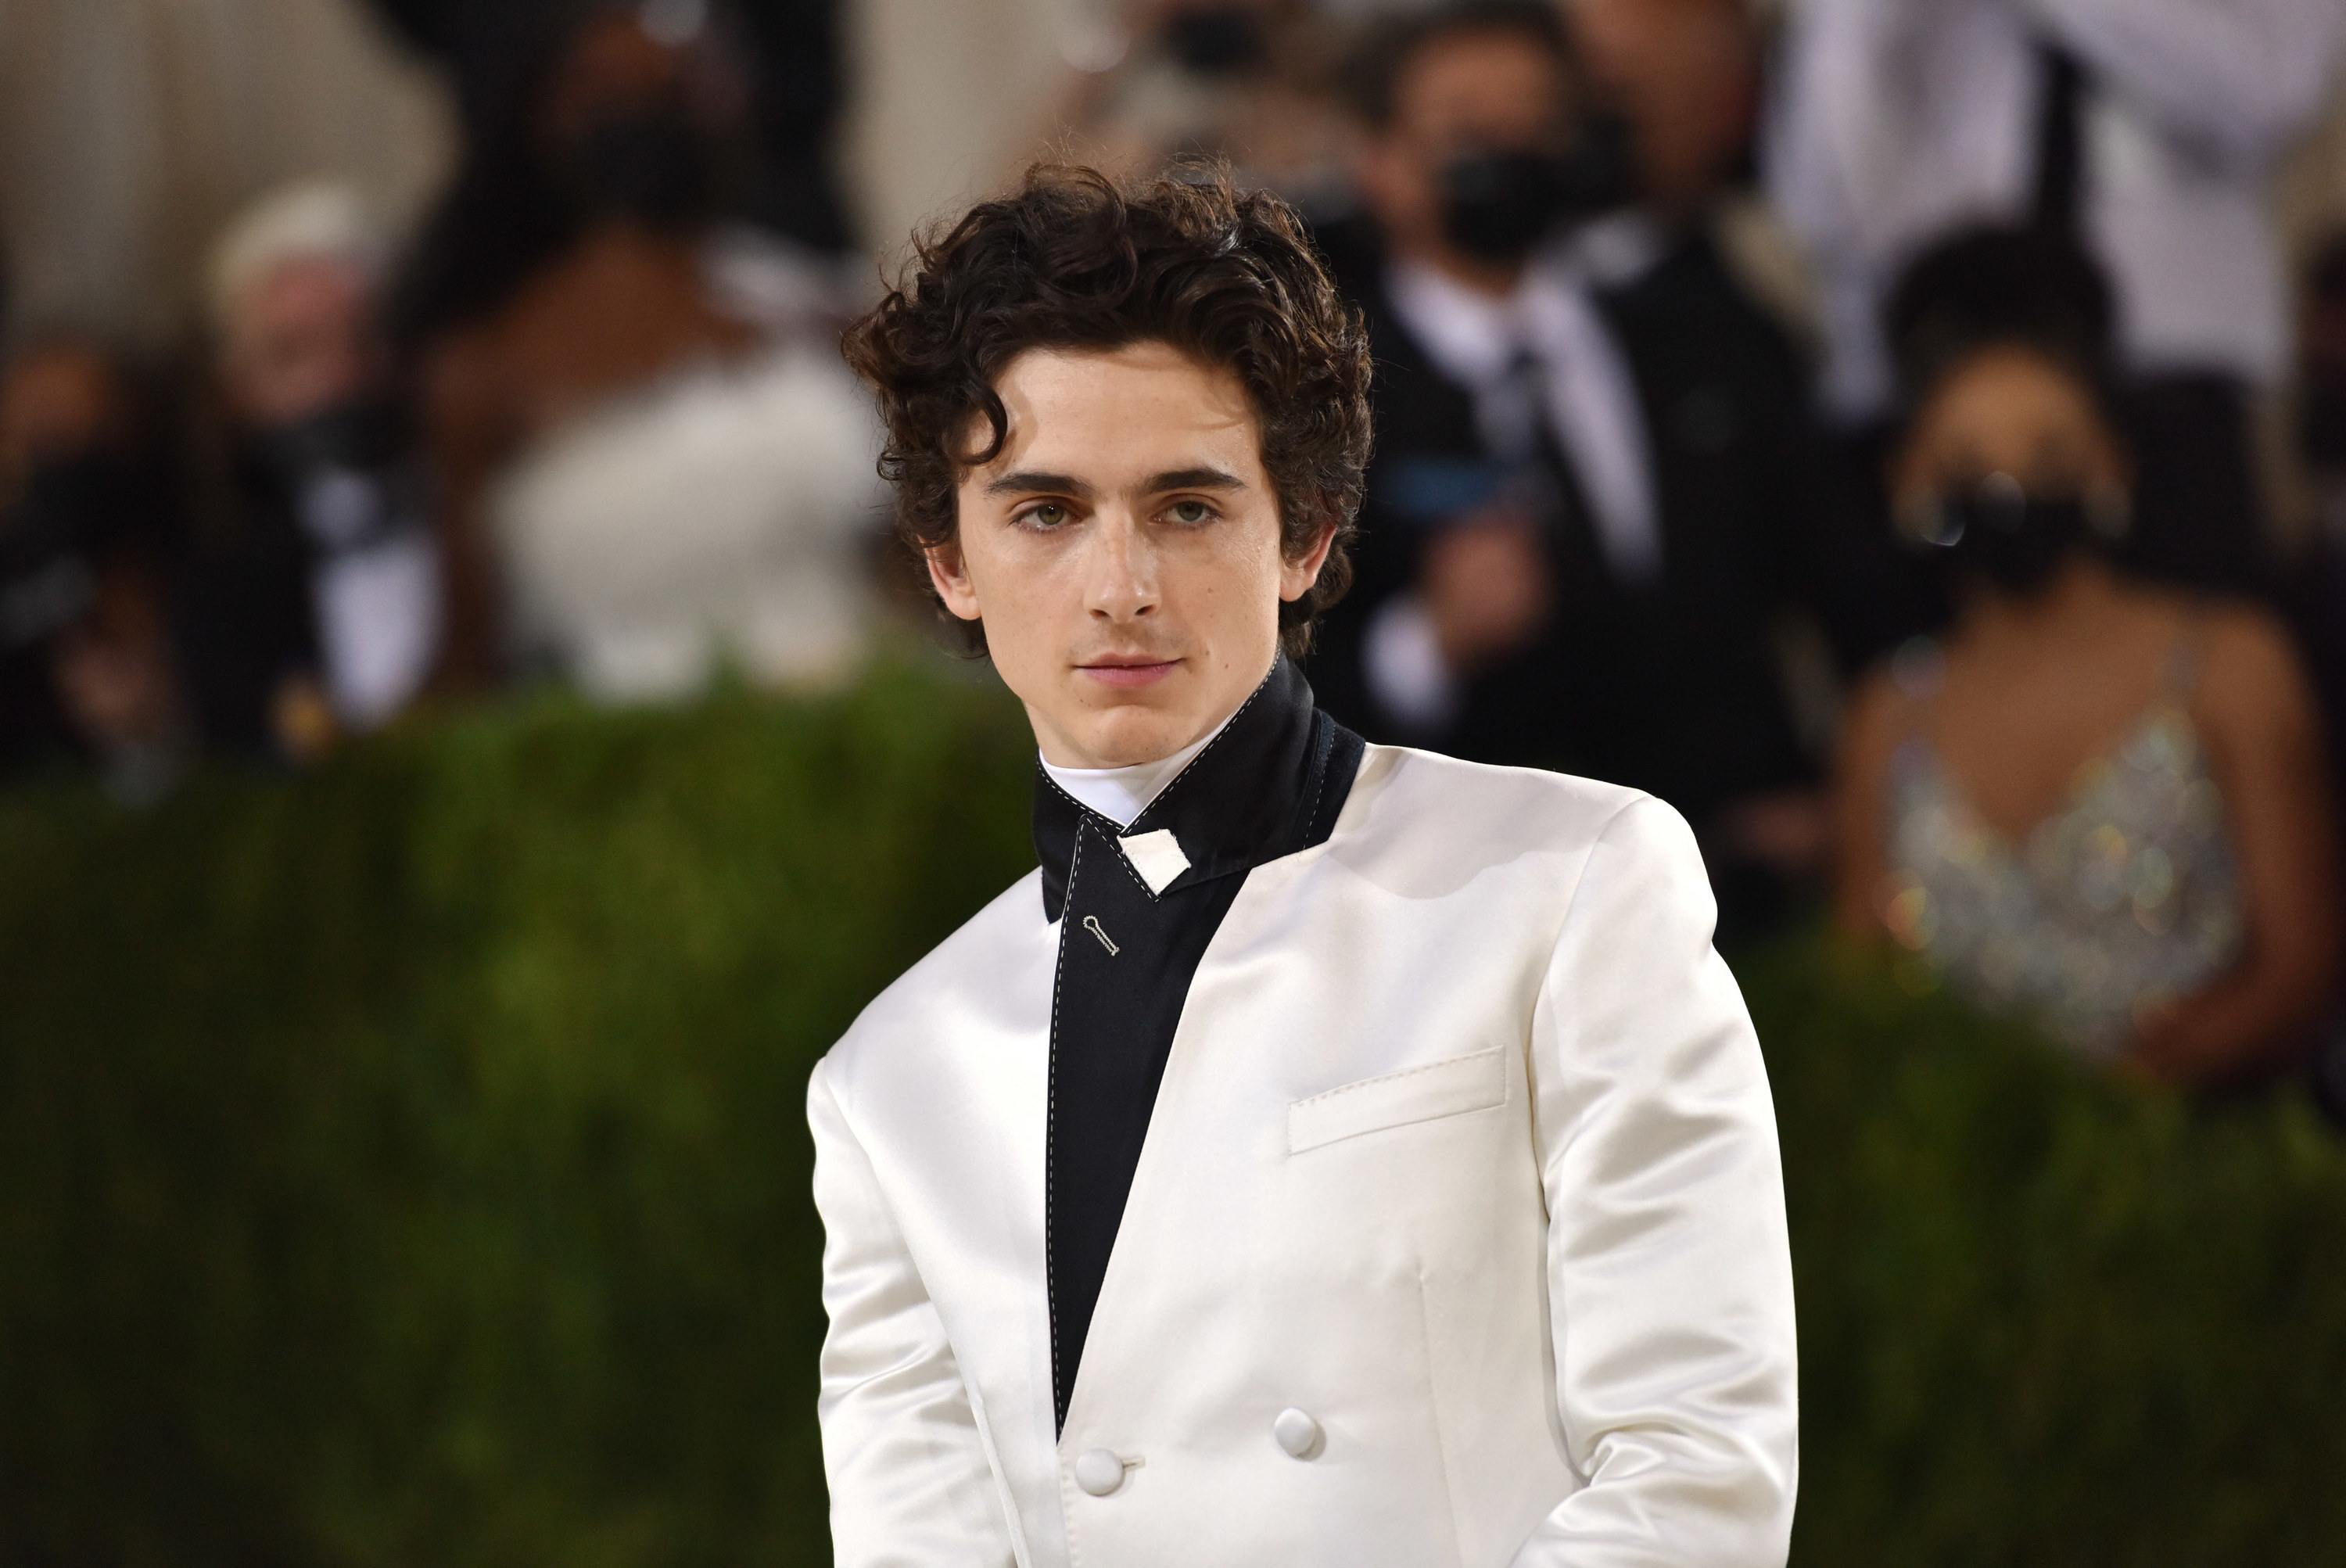 Timothée Chalamet Is Promoting 'Wonka' by Dating Kylie Jenner